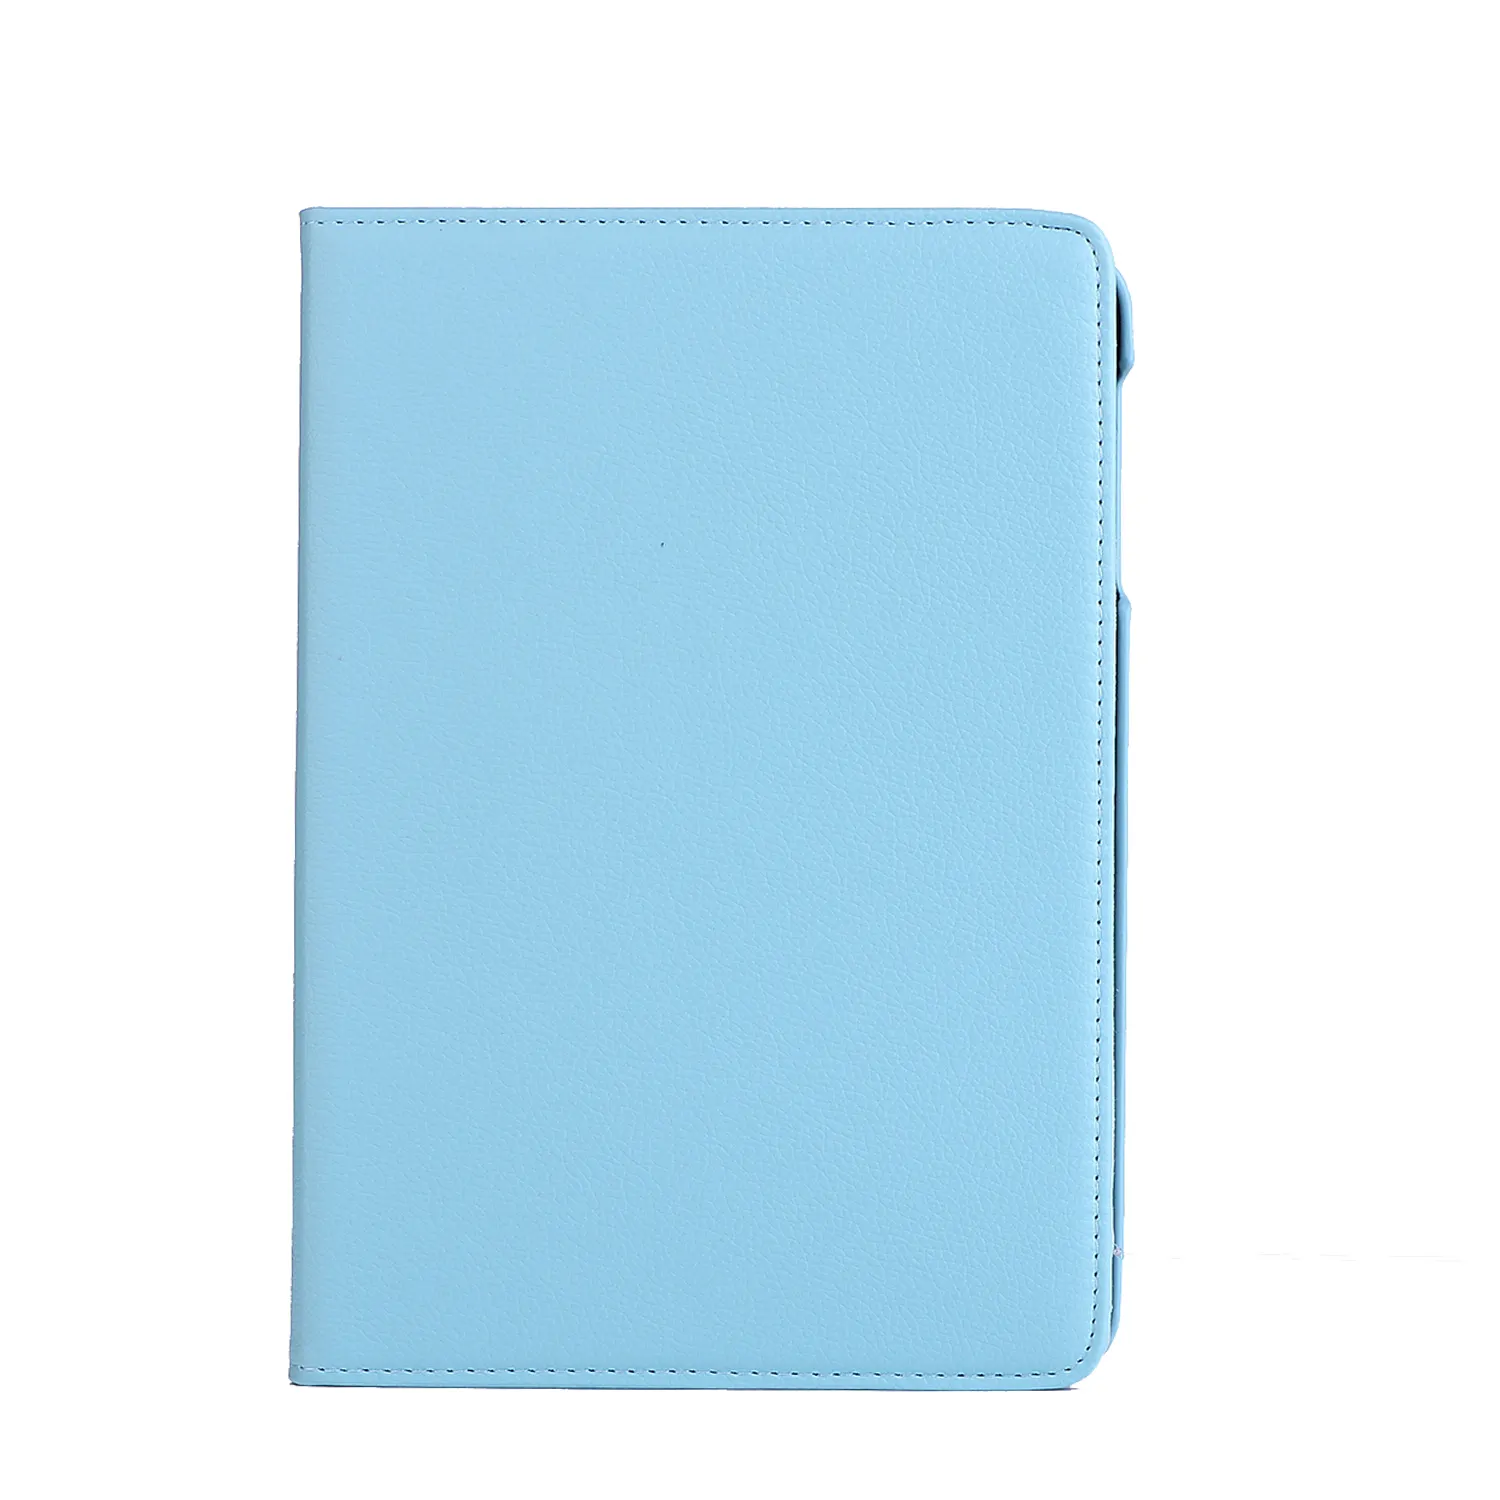 Flip Smart Cover Case for Samsung galaxy tab S3 9.7 inch SM-T820/SM-T825 solid PU Leather back stand rotation tablet shell